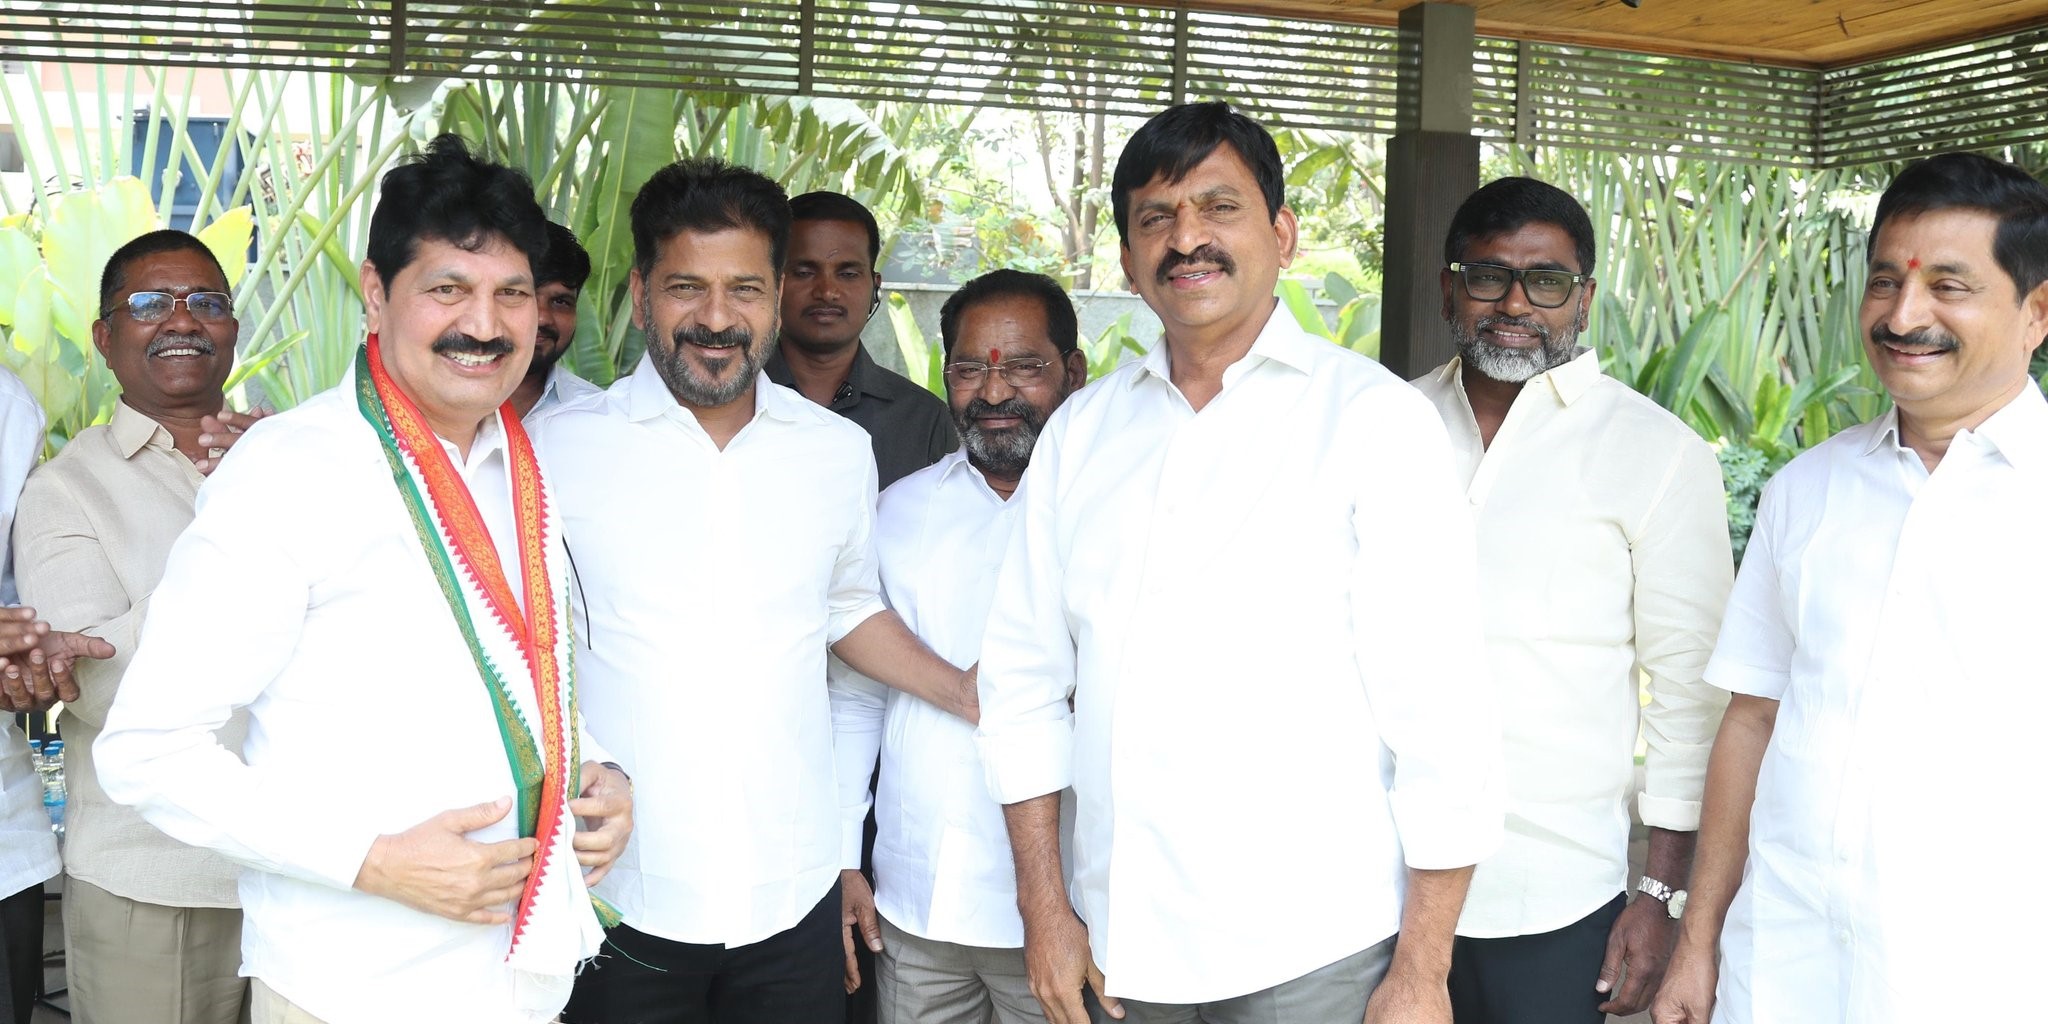 Tellam Venkat Rao joined Congress in the presence of Chief Minister Revanth Reddy. (X)